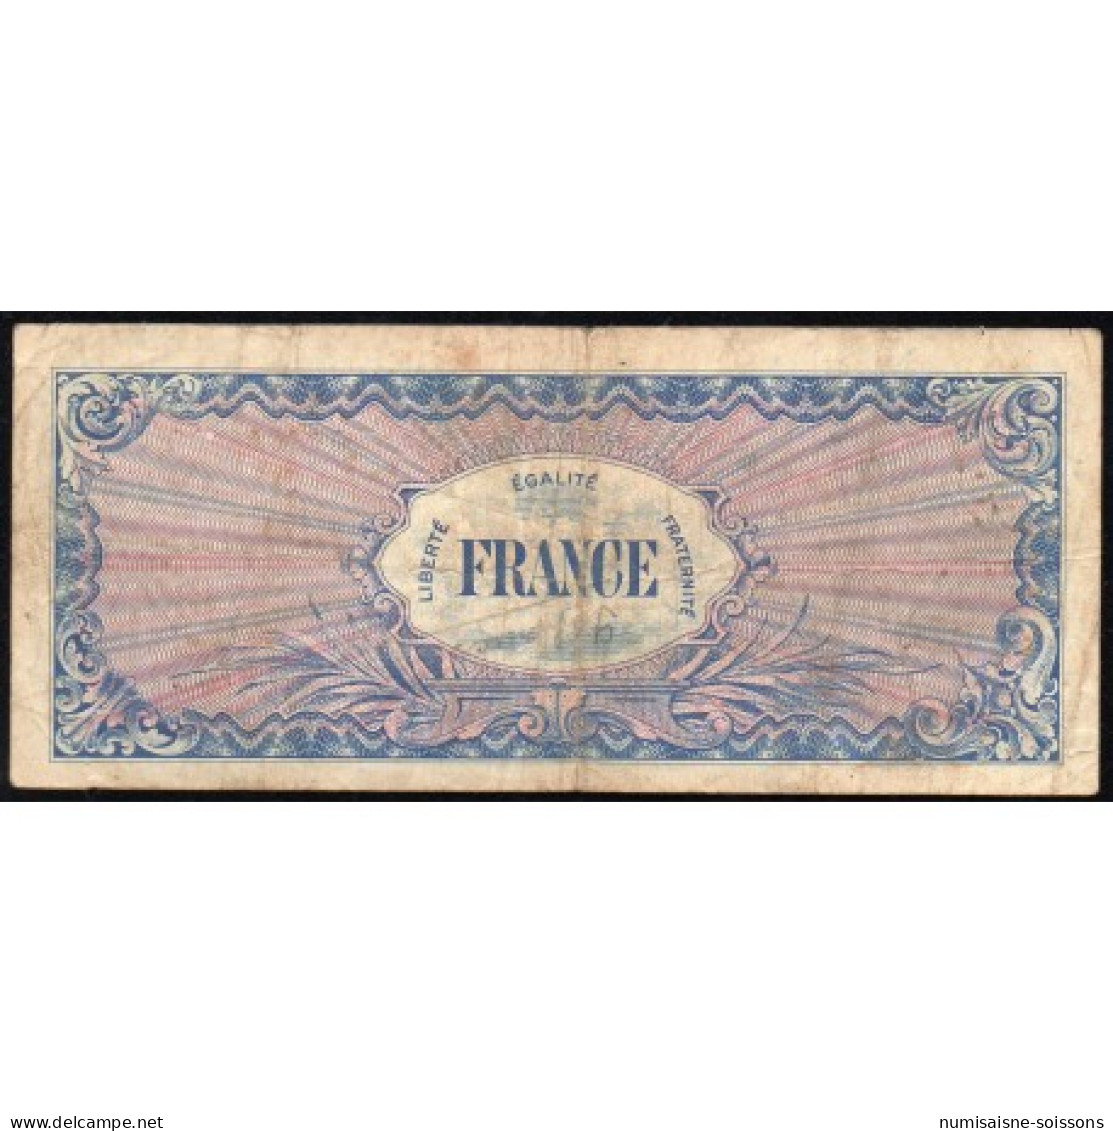 FAY VF 25/8 - 100 FRANCS VERSO FRANCE - 1945 - SERIE 8 - PICK 105s - TB - Ohne Zuordnung